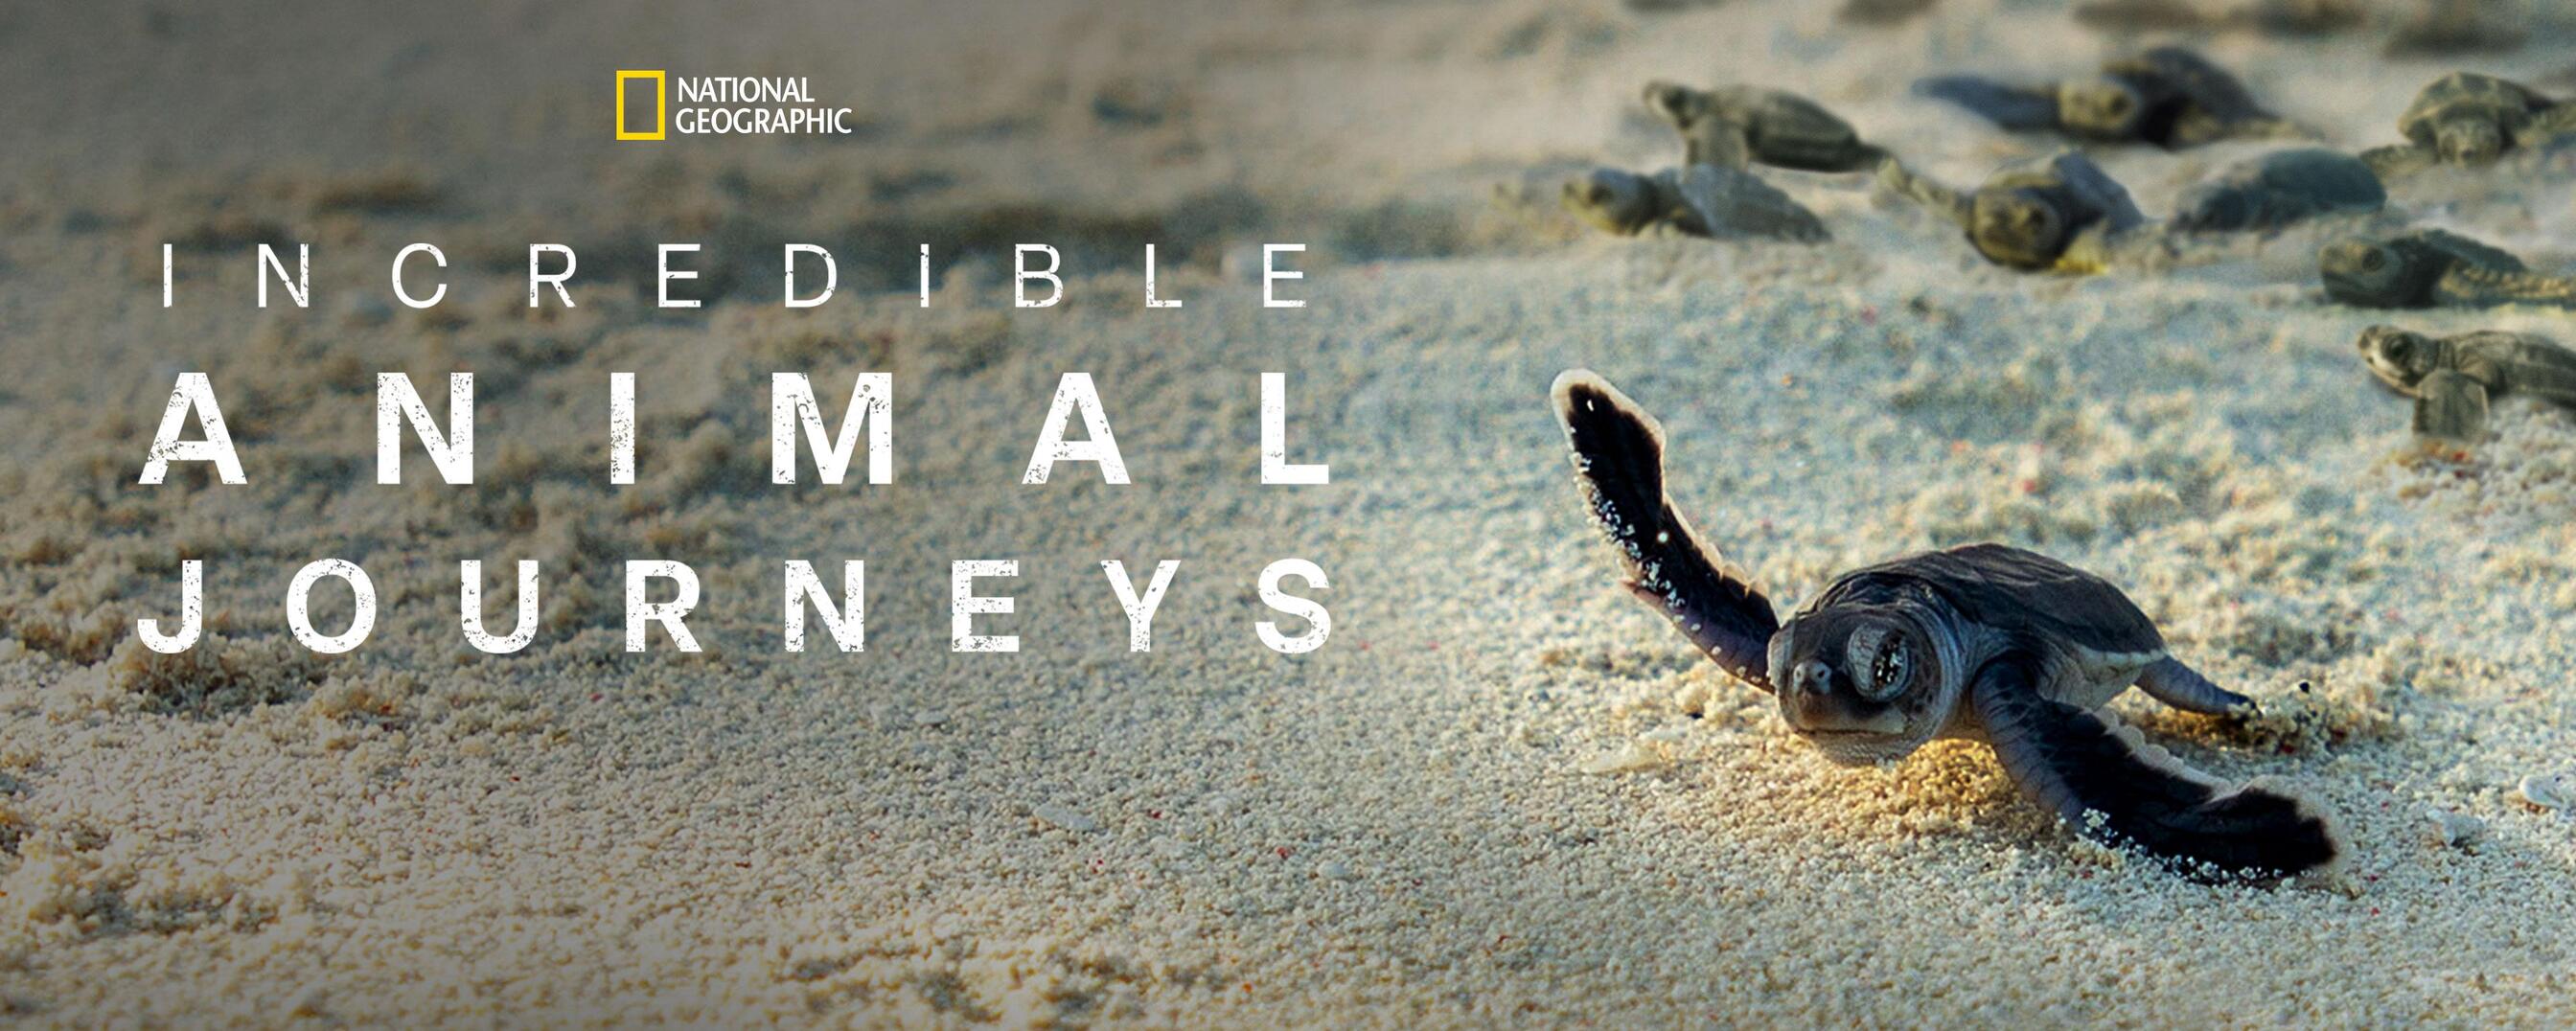 Watch Incredible Animal Journeys TV Show - Streaming Online